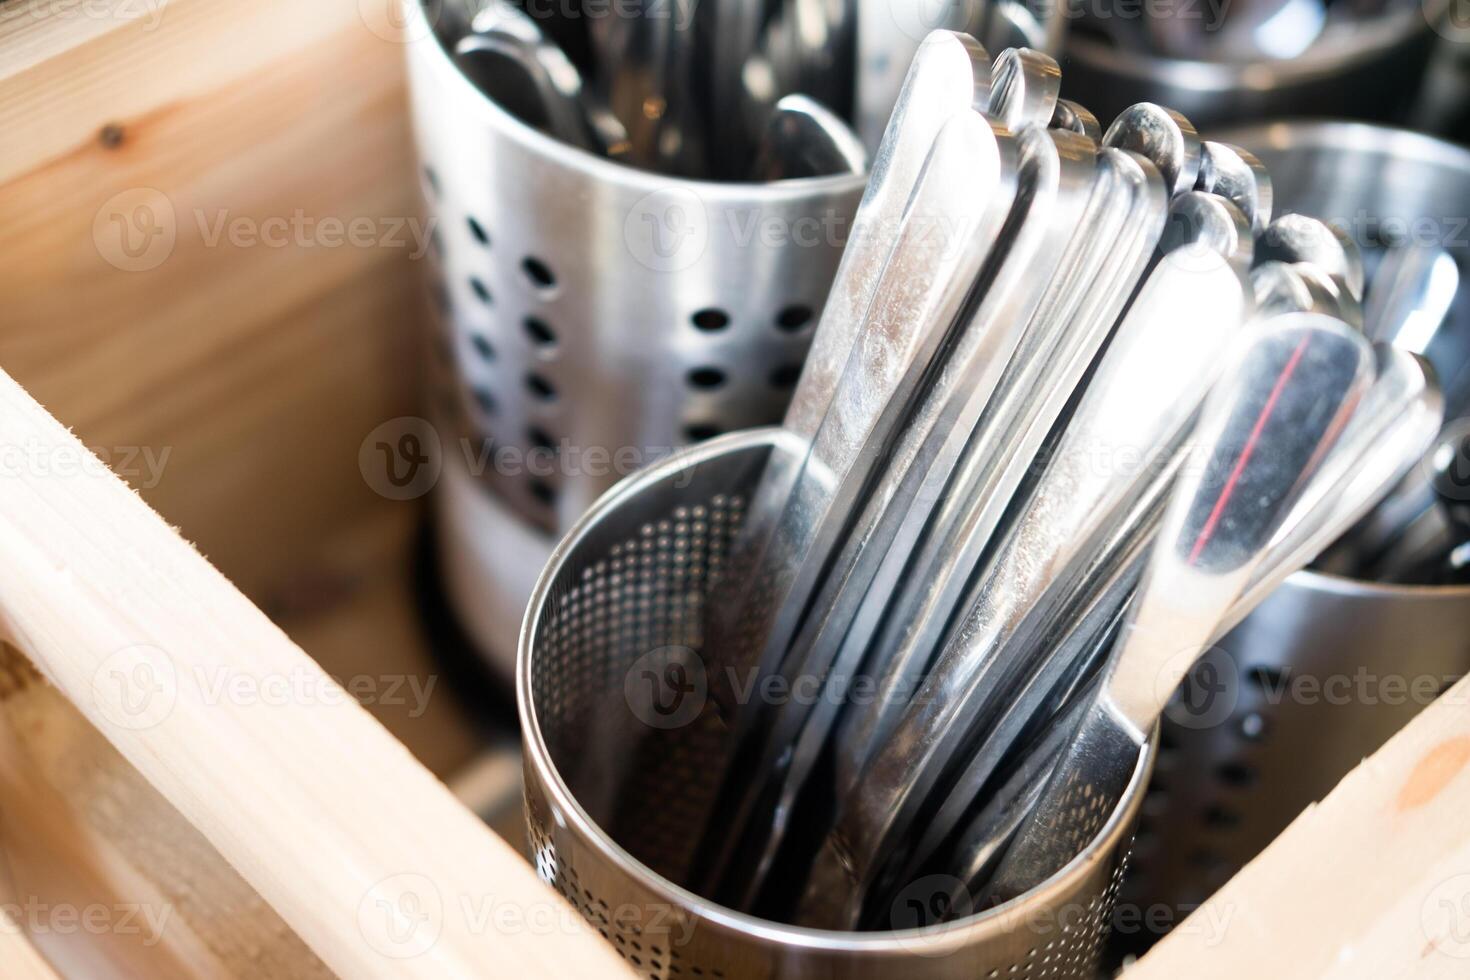 Cutlery set fork, spoon and knife in a cafe or restaurant photo